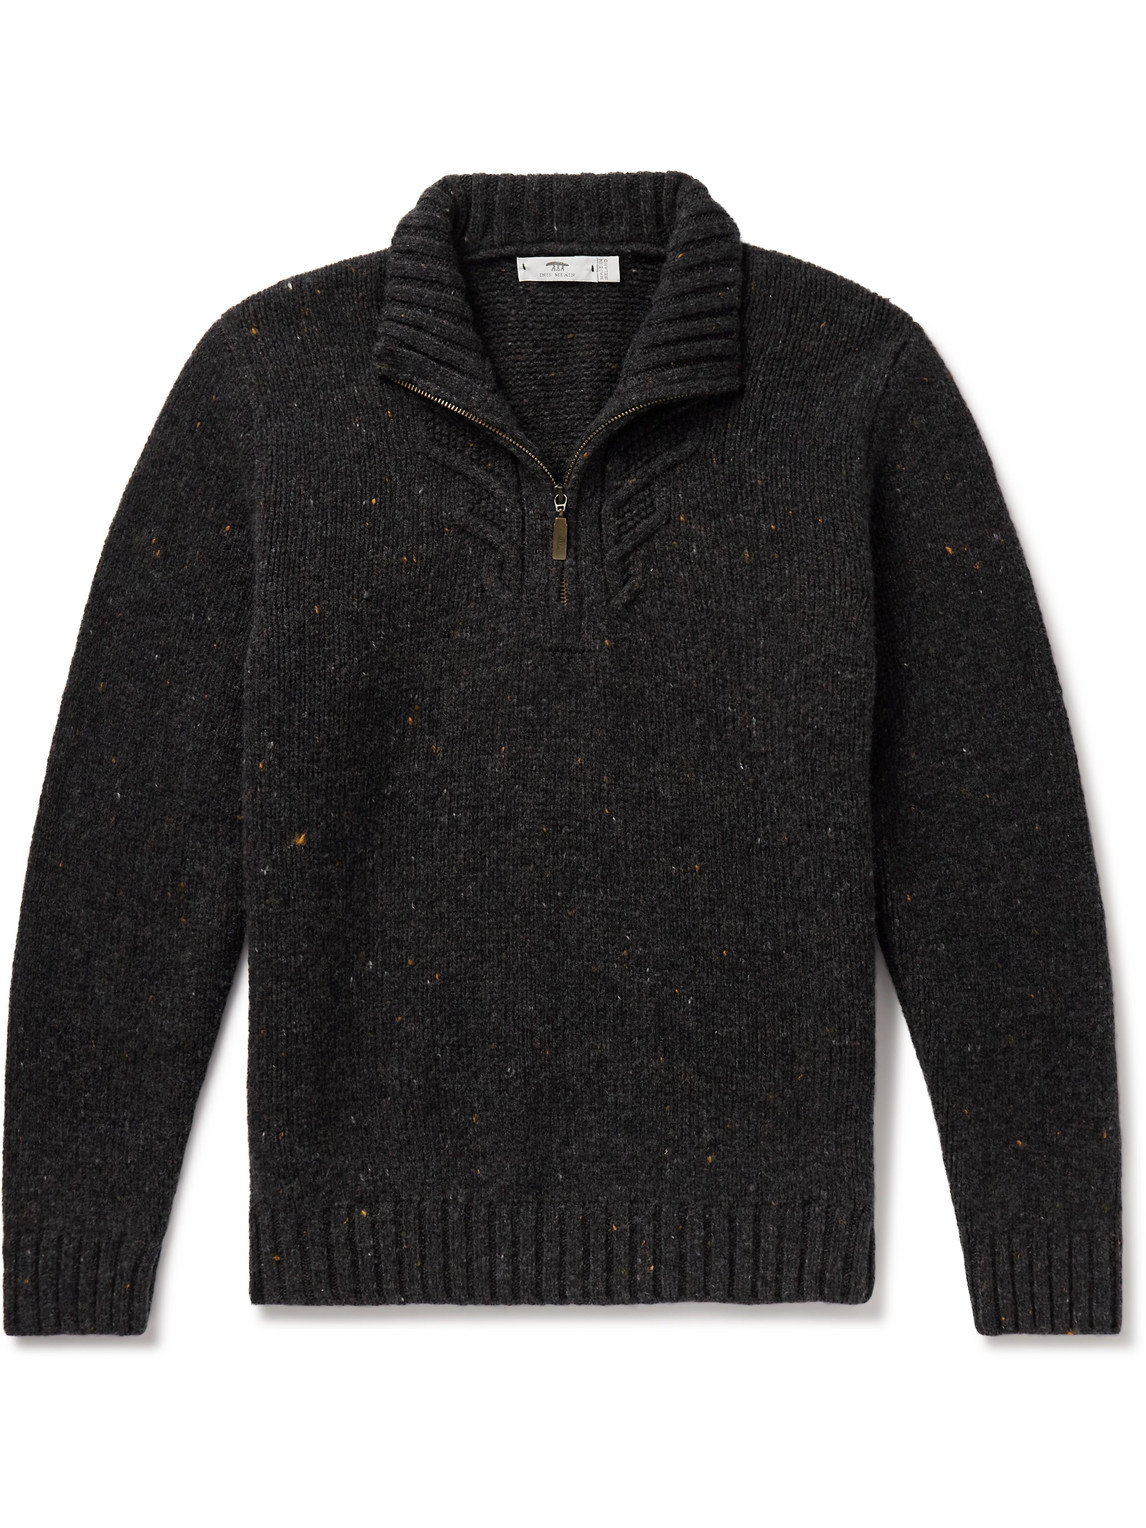 Inis Meain Rowan Donegal Merino Wool And Cashmere-blend Half-zip Sweater In Black